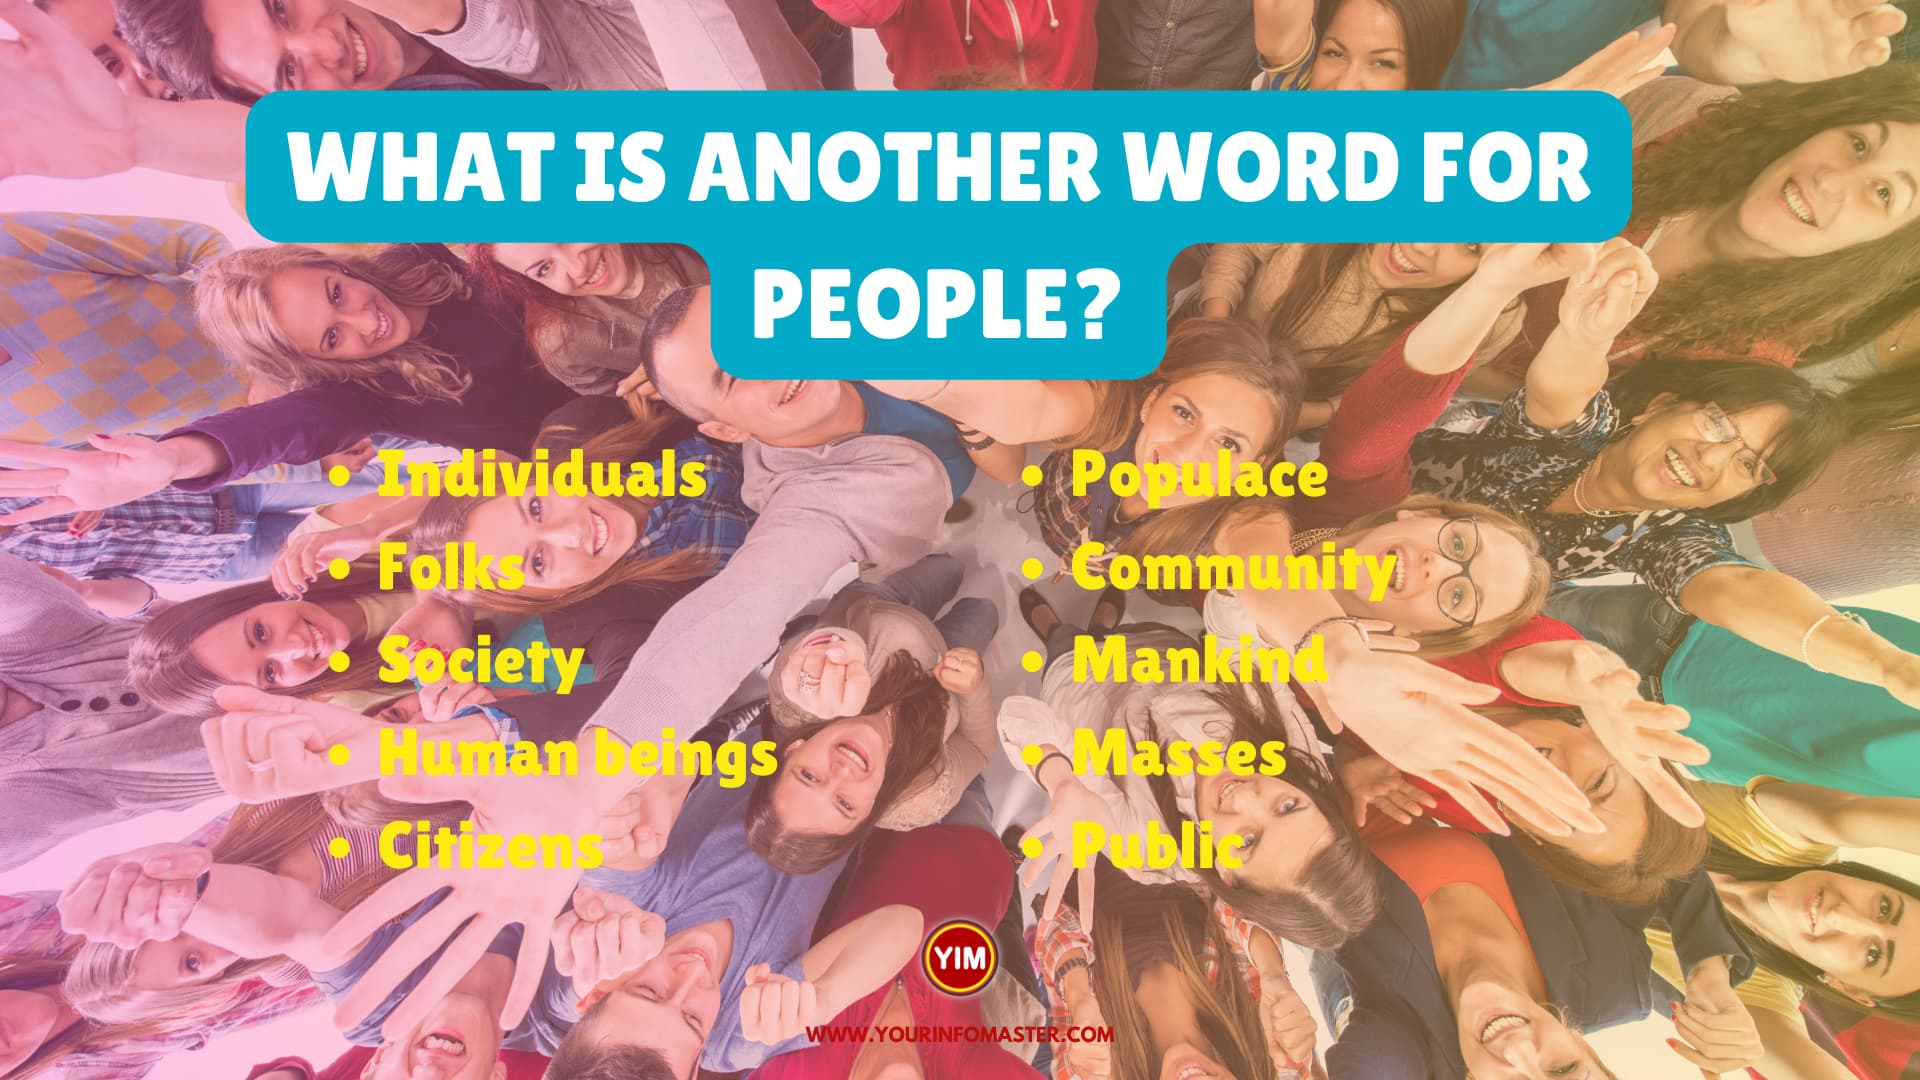 What is another word for People